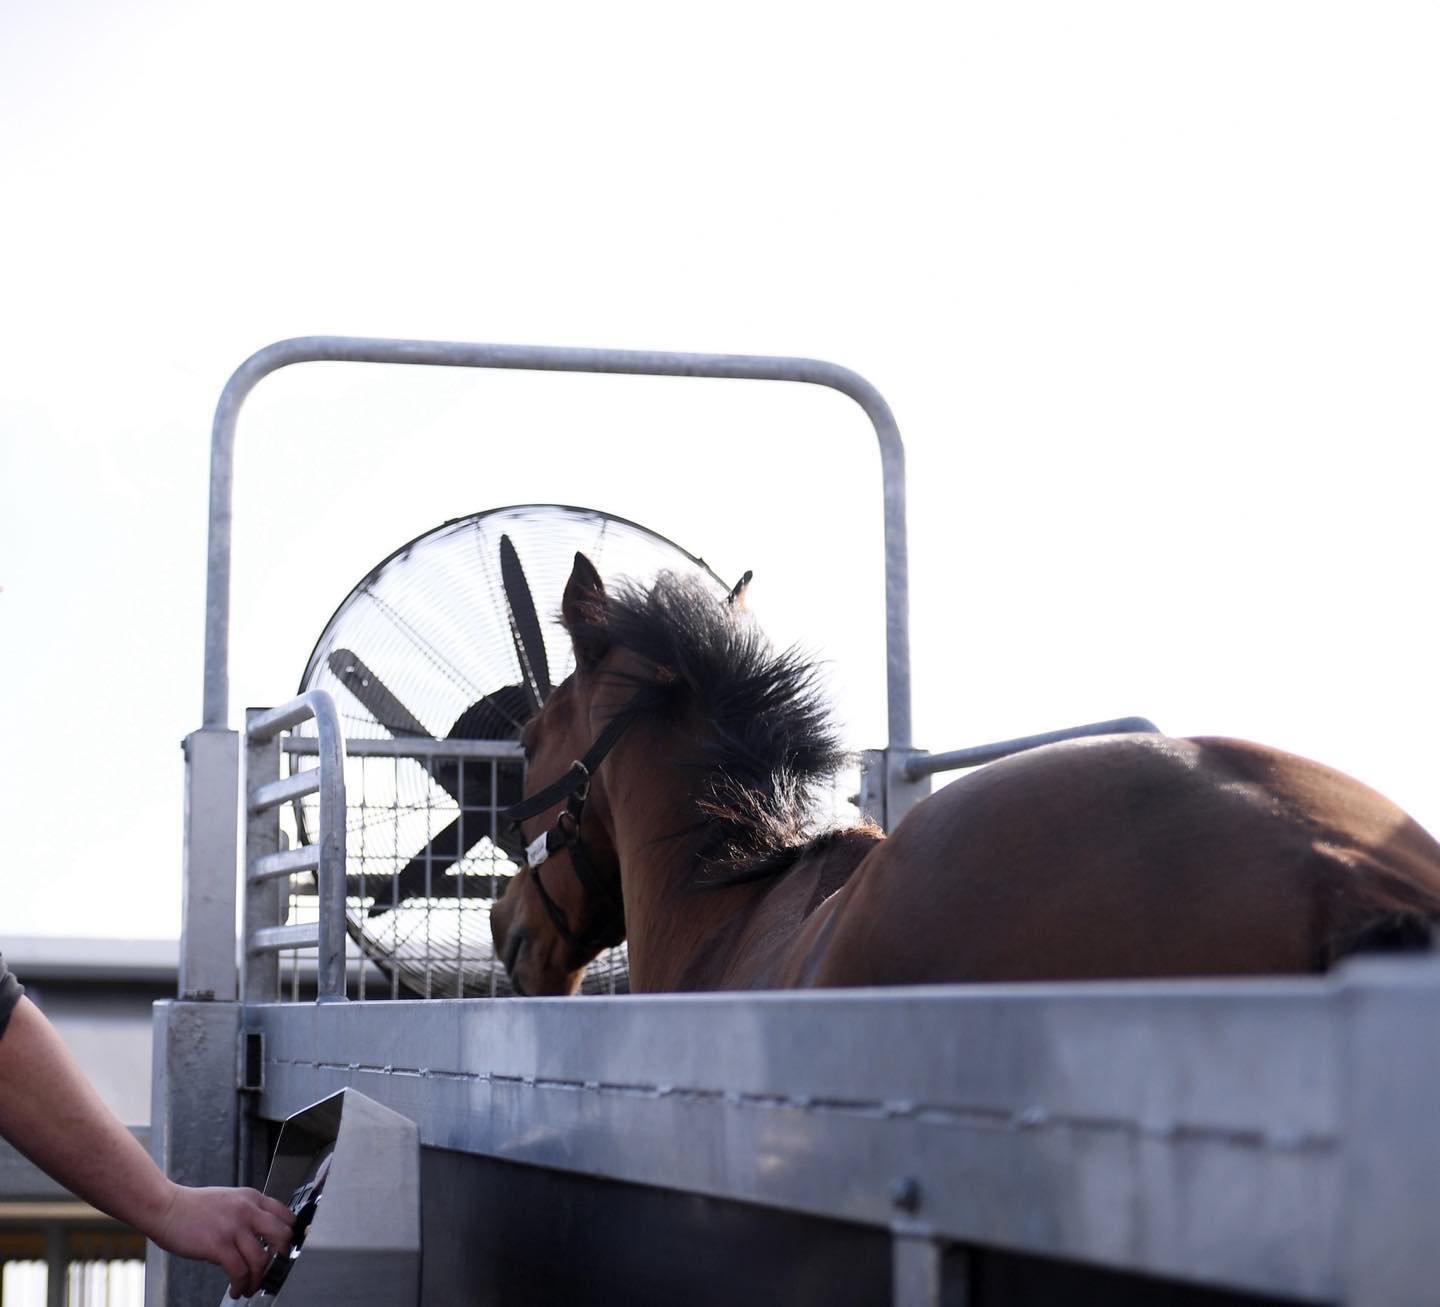 Putting our treadmill to good use as we gear up for Summer Racing #summer #racehorse #teamdunn photo @htrumpphoto